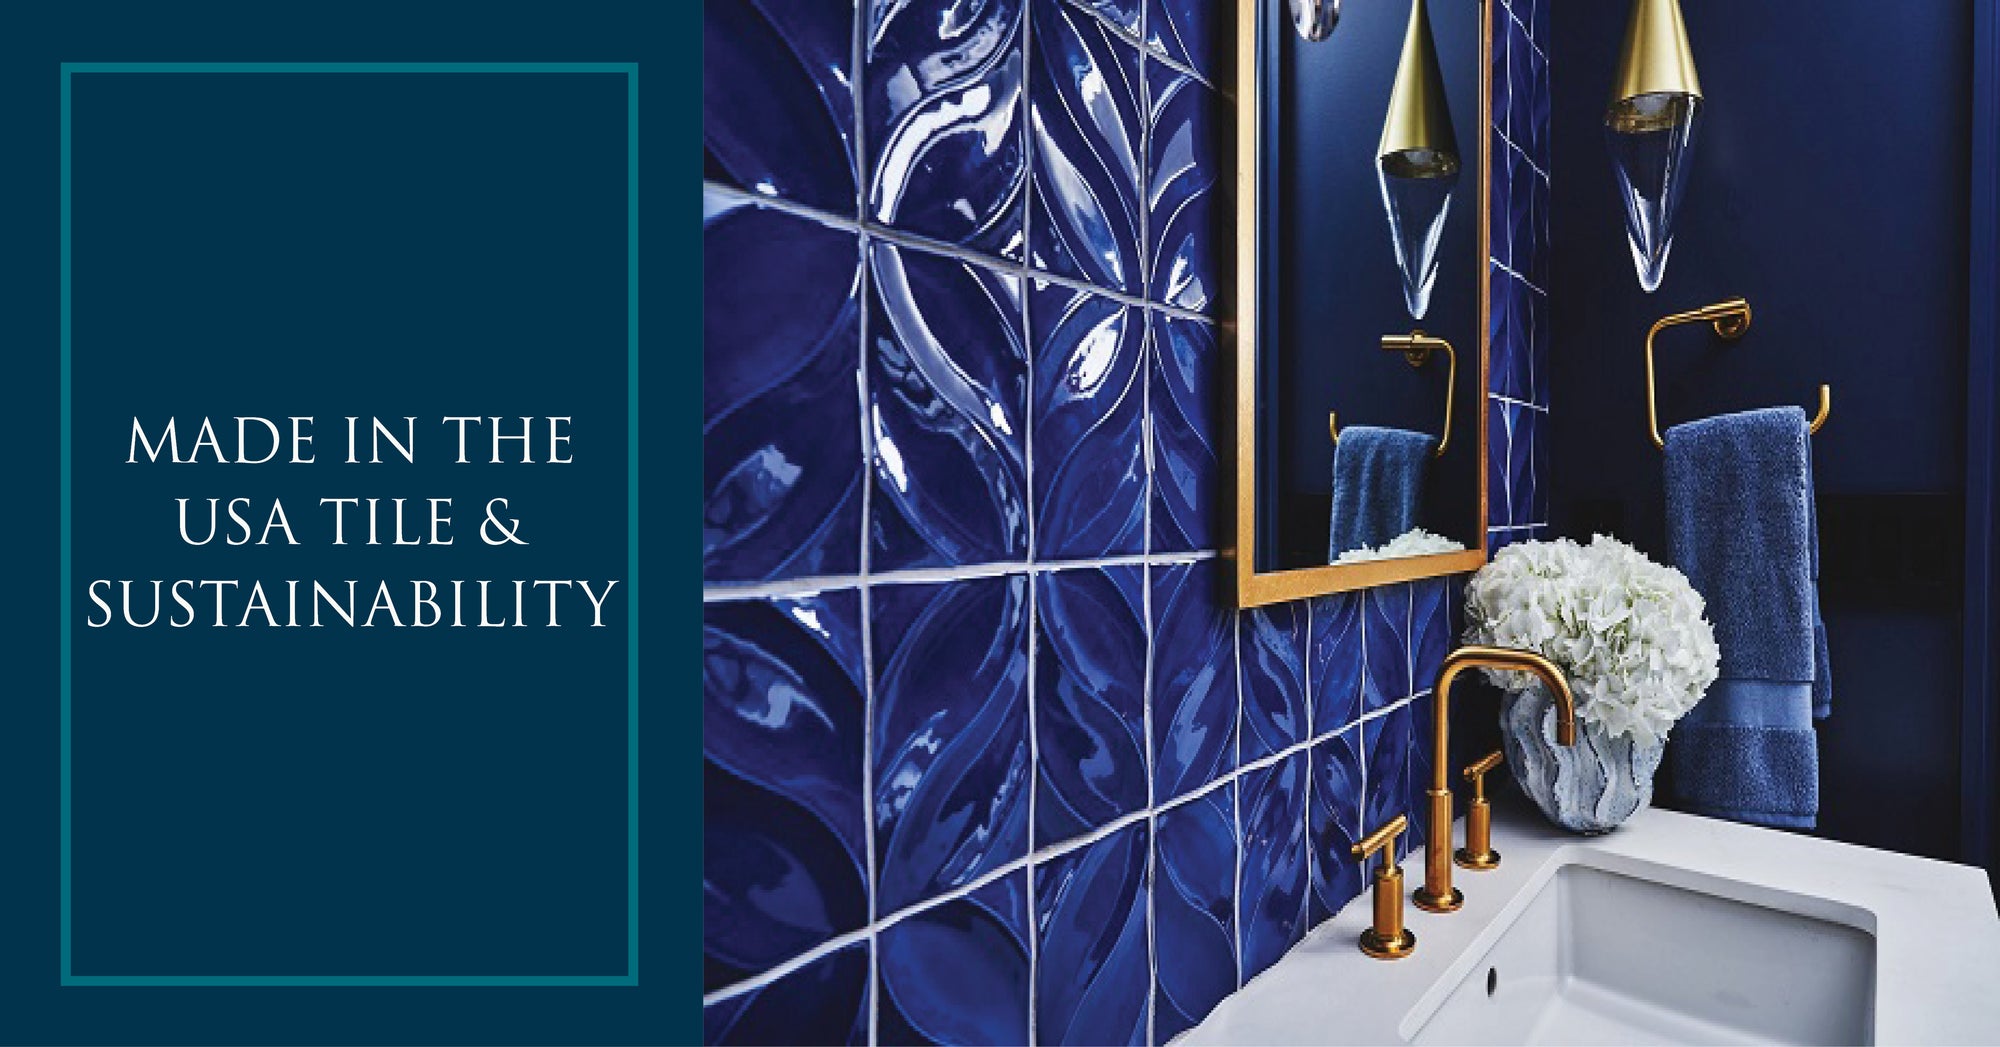 Made in the USA Tile & Sustainability